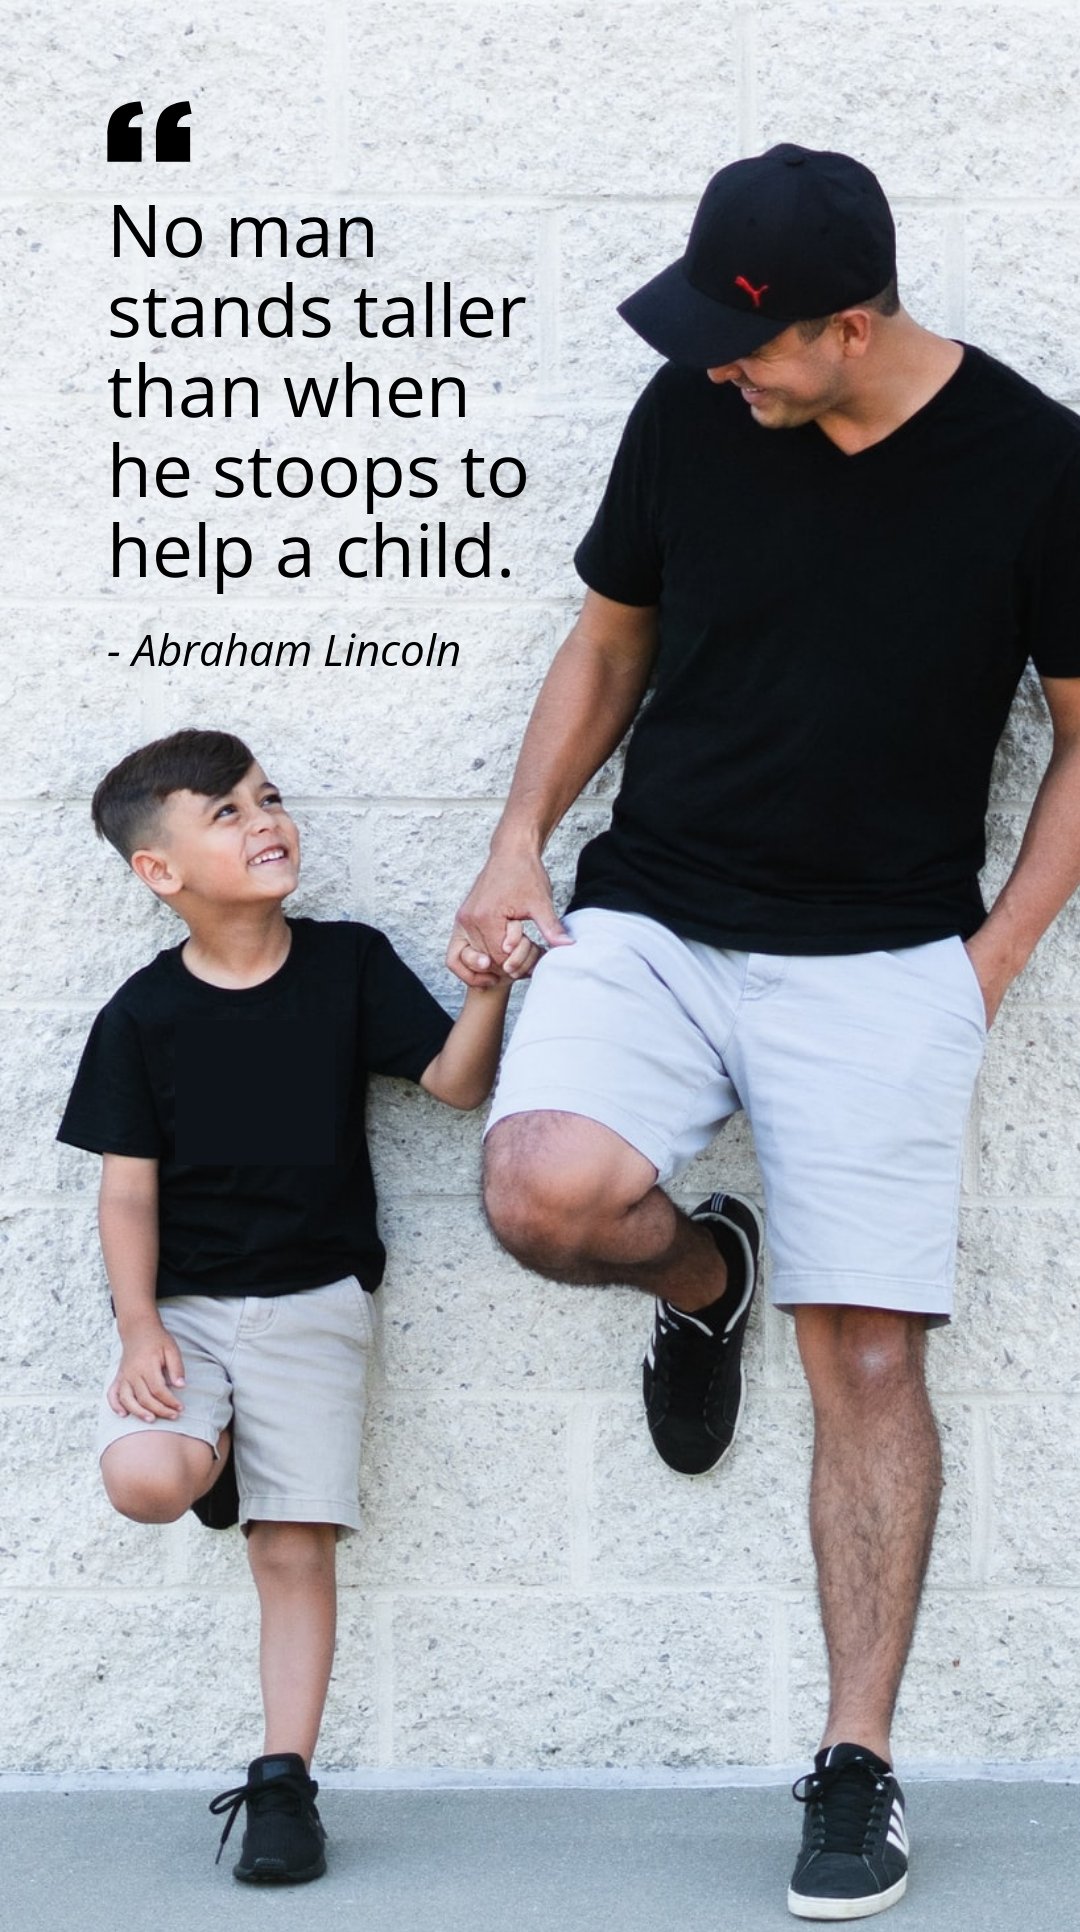 Abraham Lincoln - No man stands taller than when he stoops to help a child.